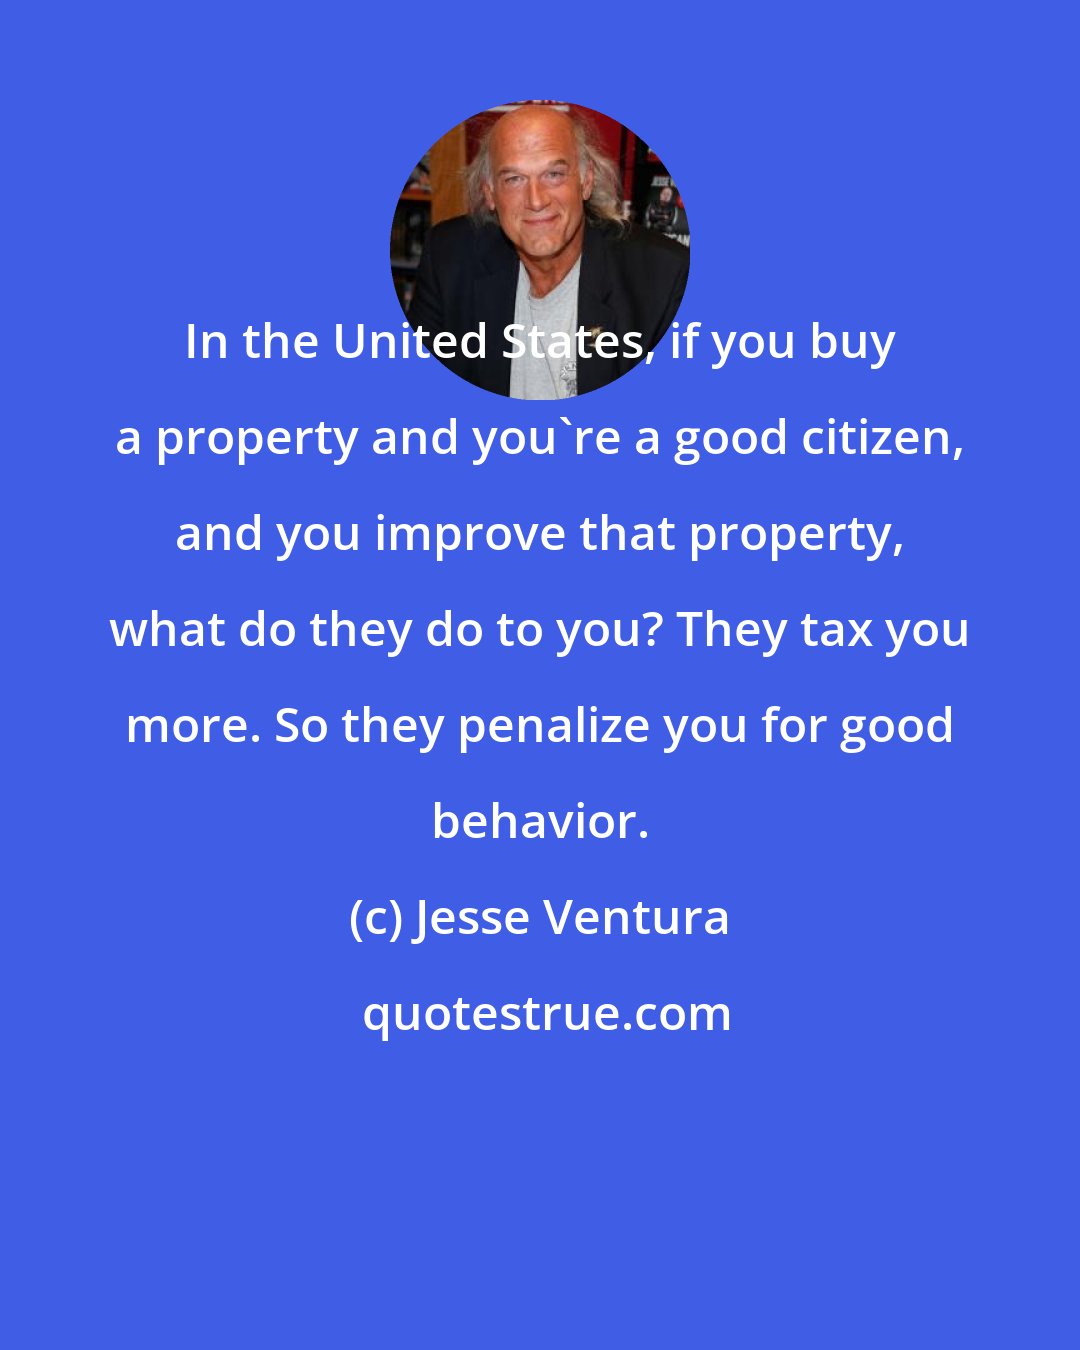 Jesse Ventura: In the United States, if you buy a property and you're a good citizen, and you improve that property, what do they do to you? They tax you more. So they penalize you for good behavior.